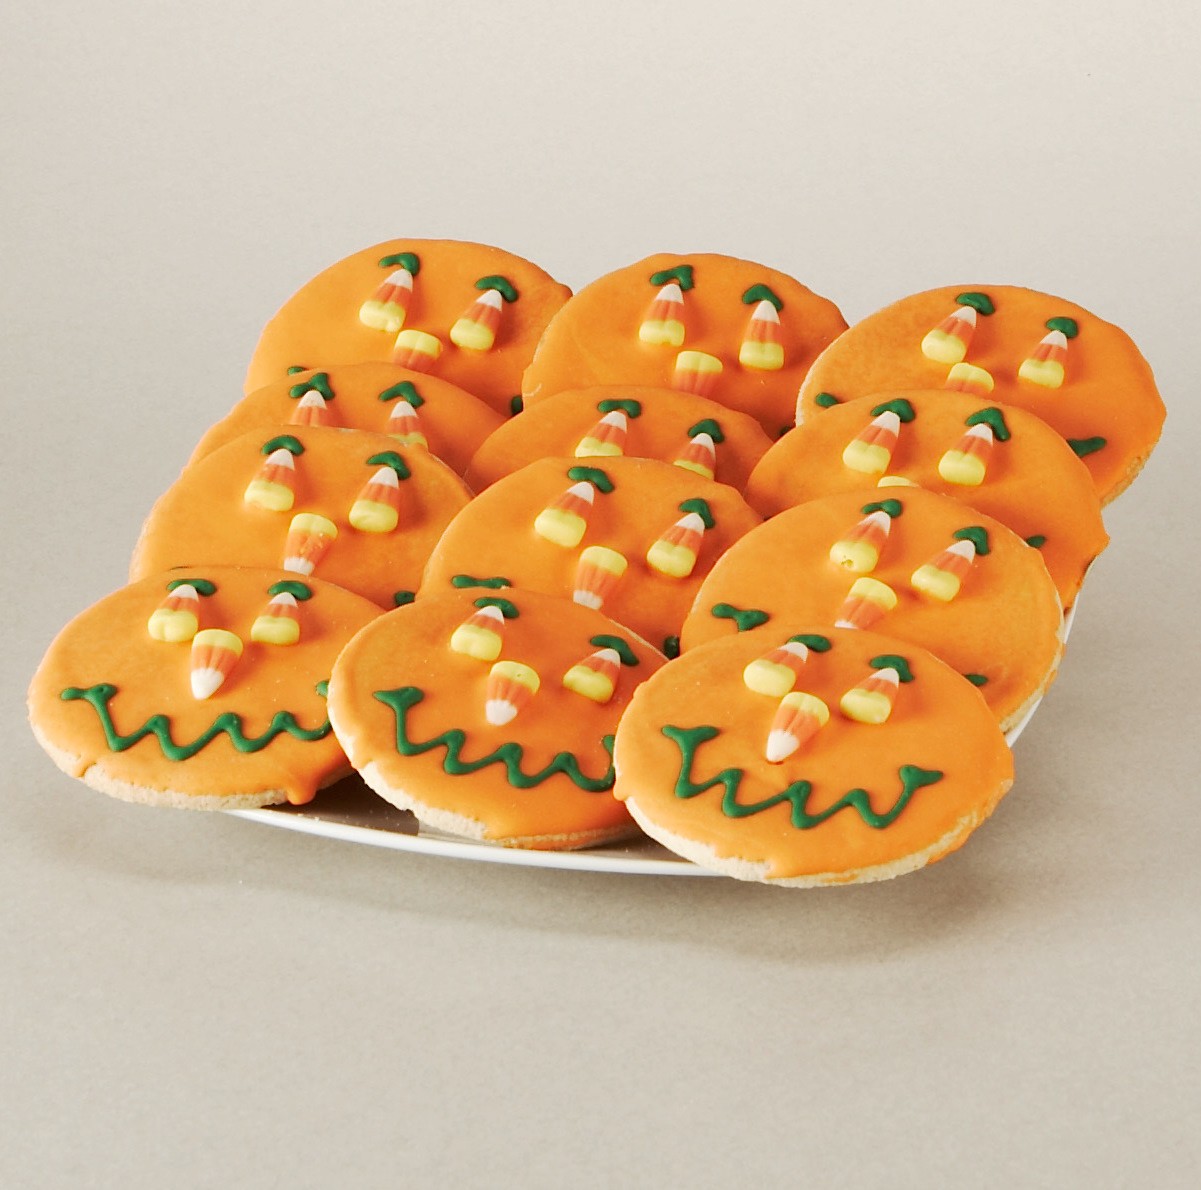 PRODUCT REVIEW + COUPON OFFER: HALLOWEEN SMILEY COOKIES